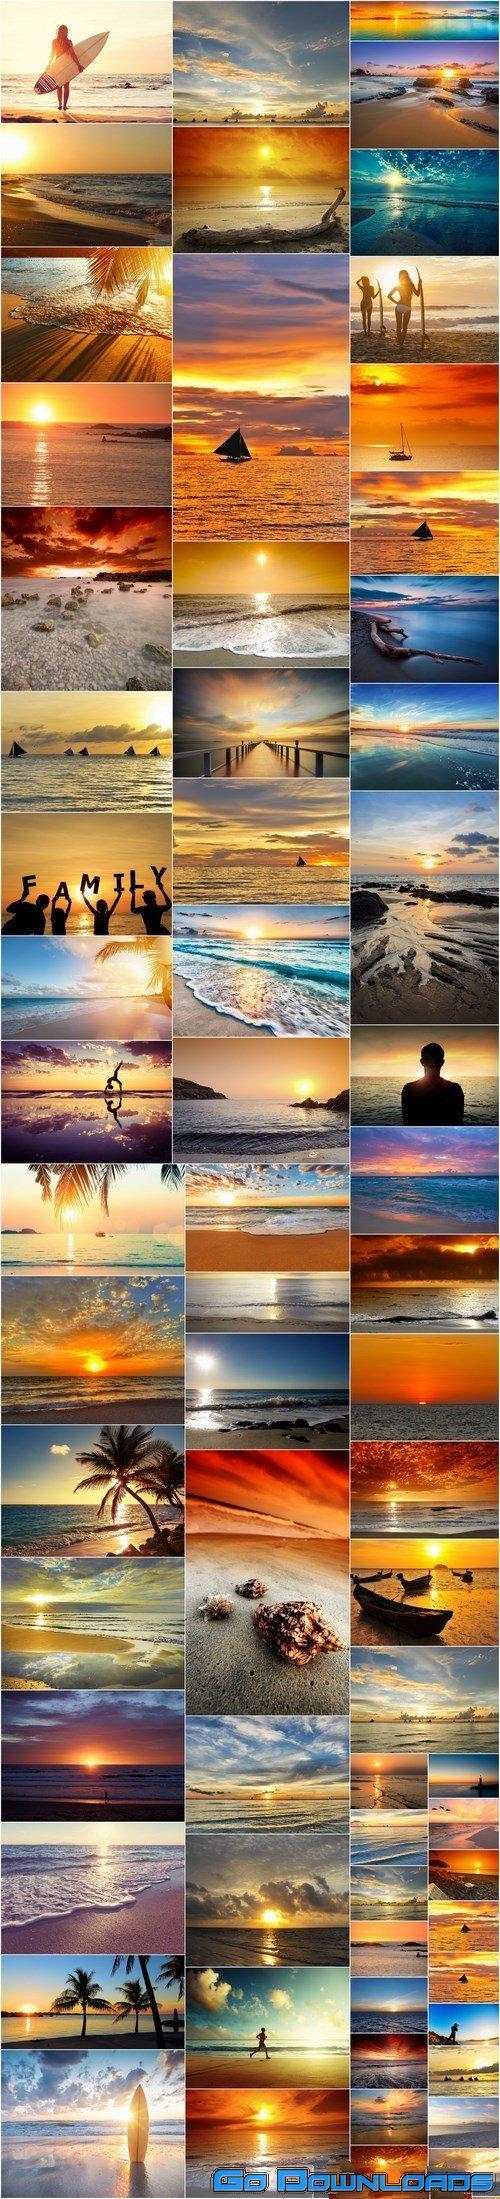 Beautiful Sunset and Sunrise at Beach Set of 66xUHQ JPEG Professional Stock Images Free Download